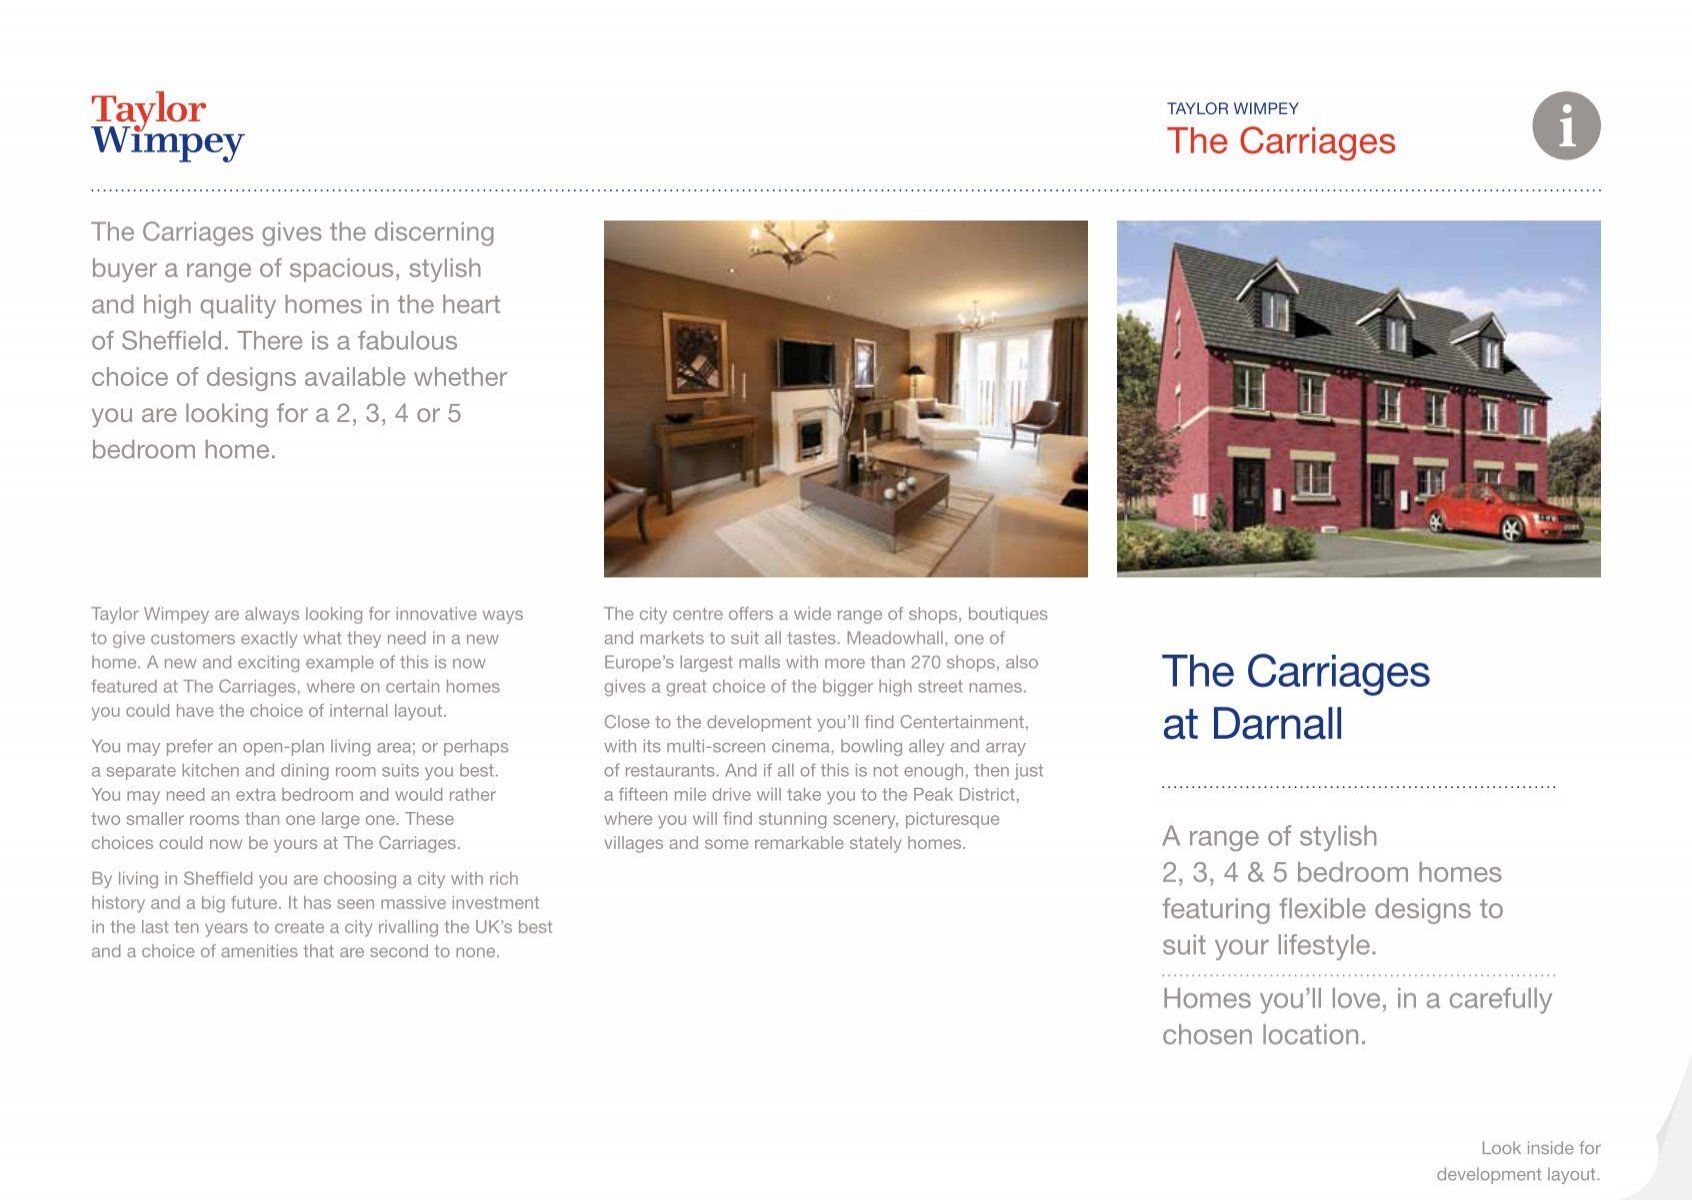 The Carriages At Darnall Taylor Wimpey